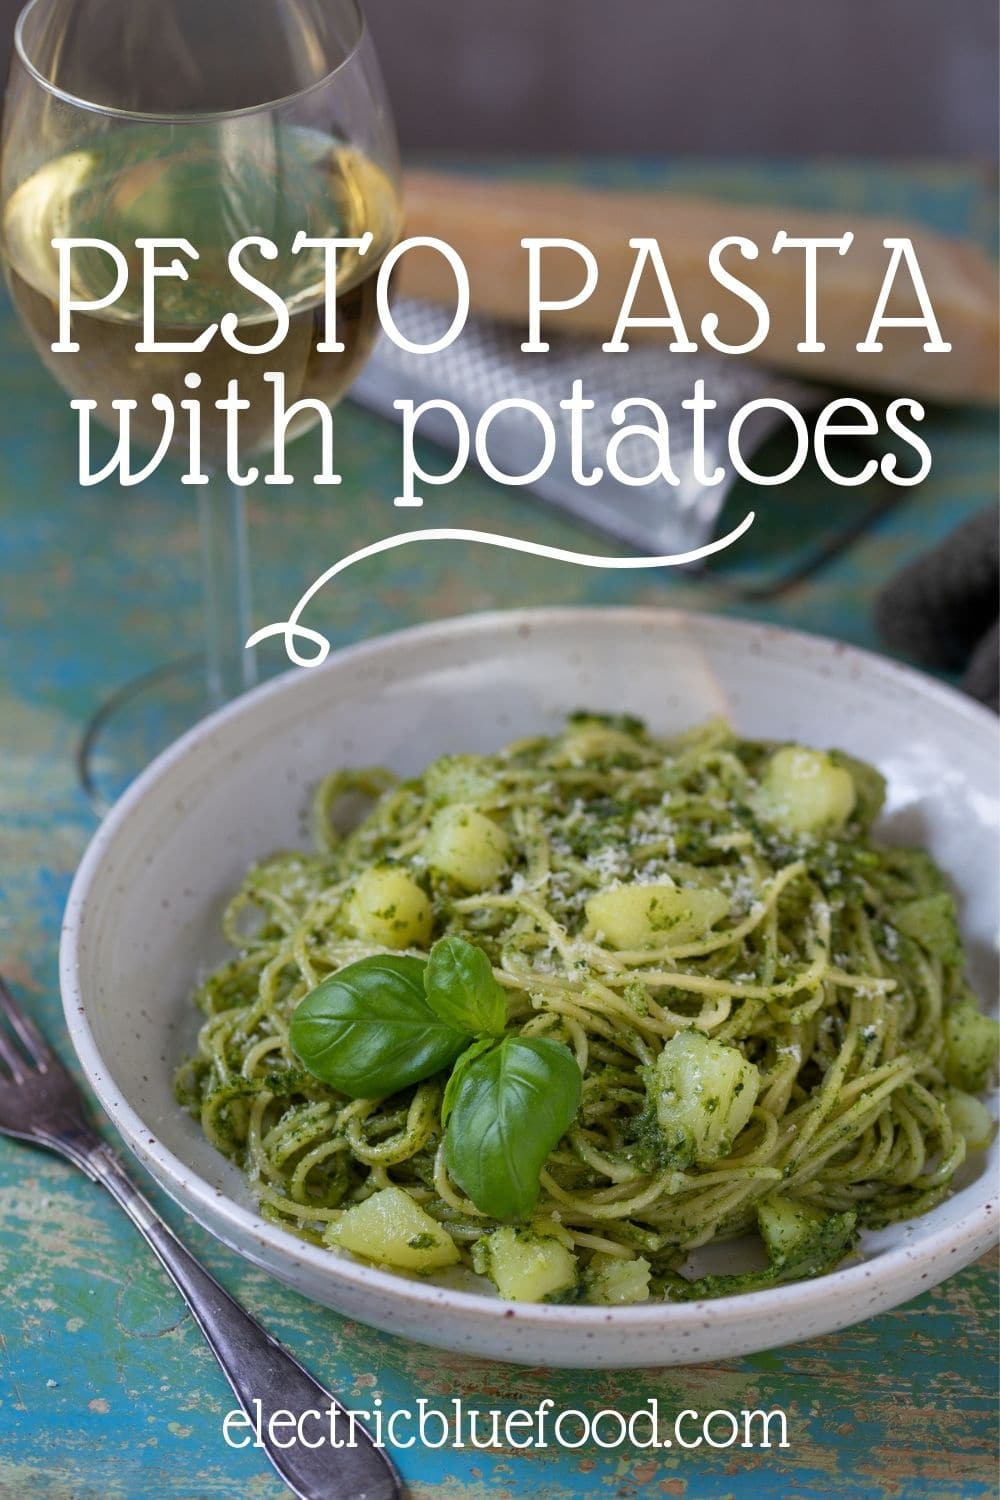 Pesto pasta with potatoes follows a traditional recipe from Liguria, the home region of basil pesto. Potatoes cooked with the pasta give this dish unexpected creaminess and texture.